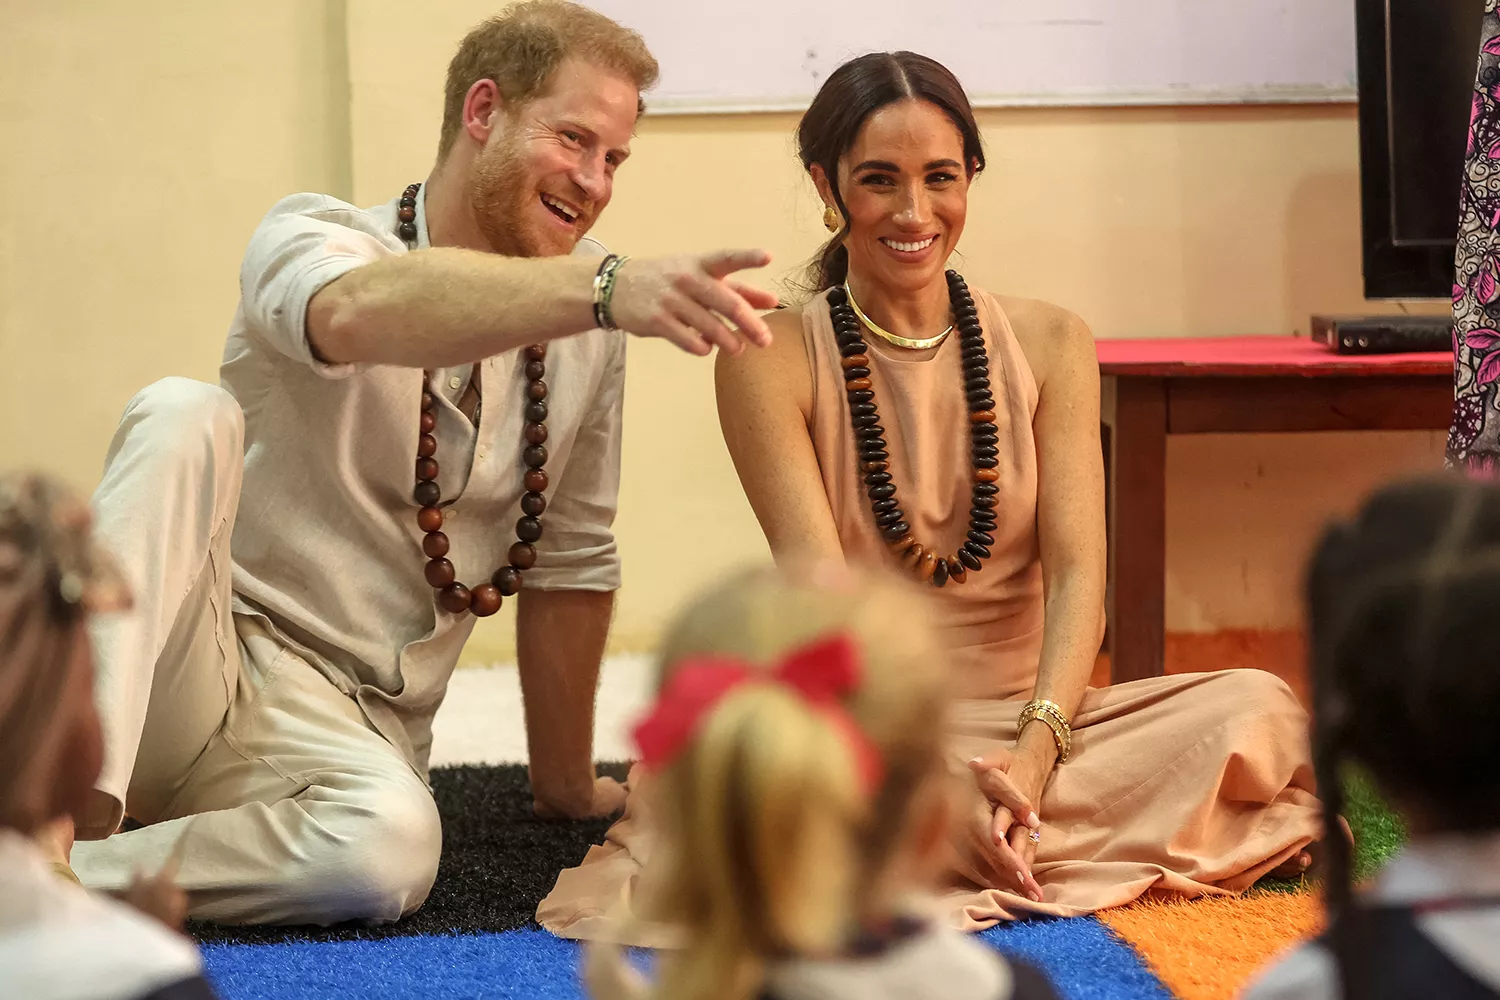 Prince Harry and Meghan’s visit to a Nigerian school in Abuja